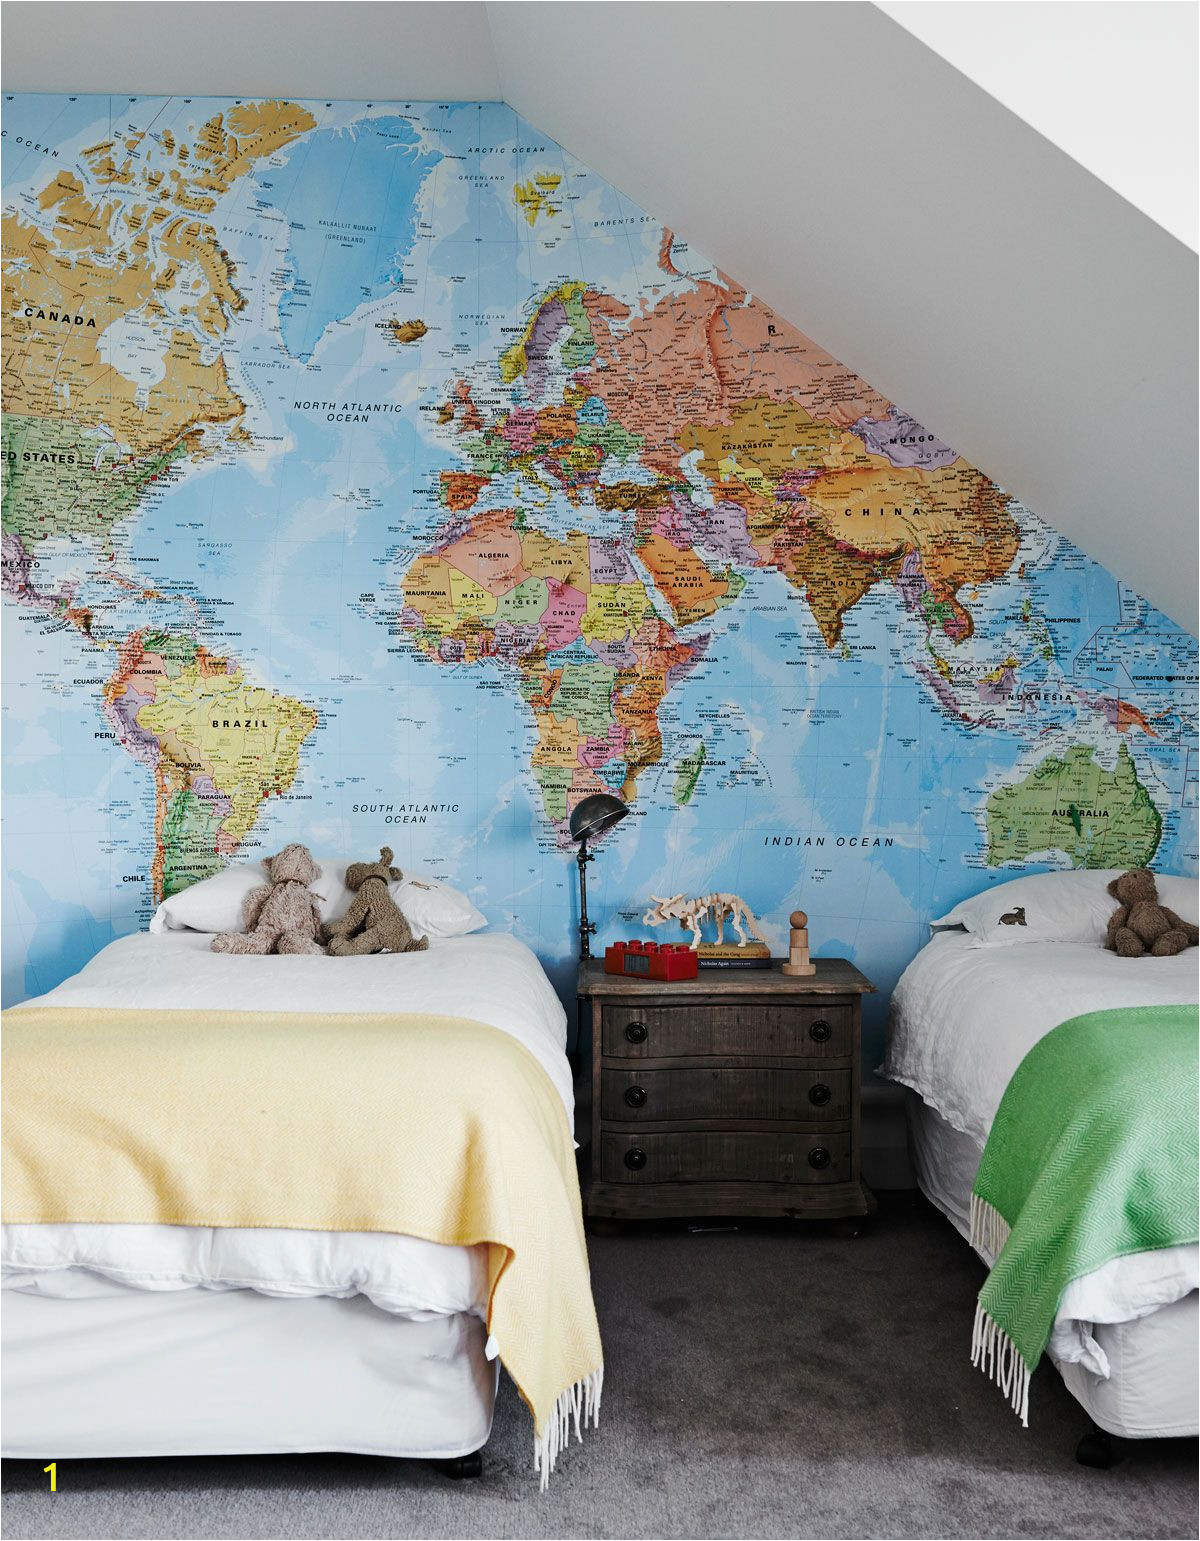 Giant Wall Map Mural Trending the Best World Map Murals and Map Wallpapers